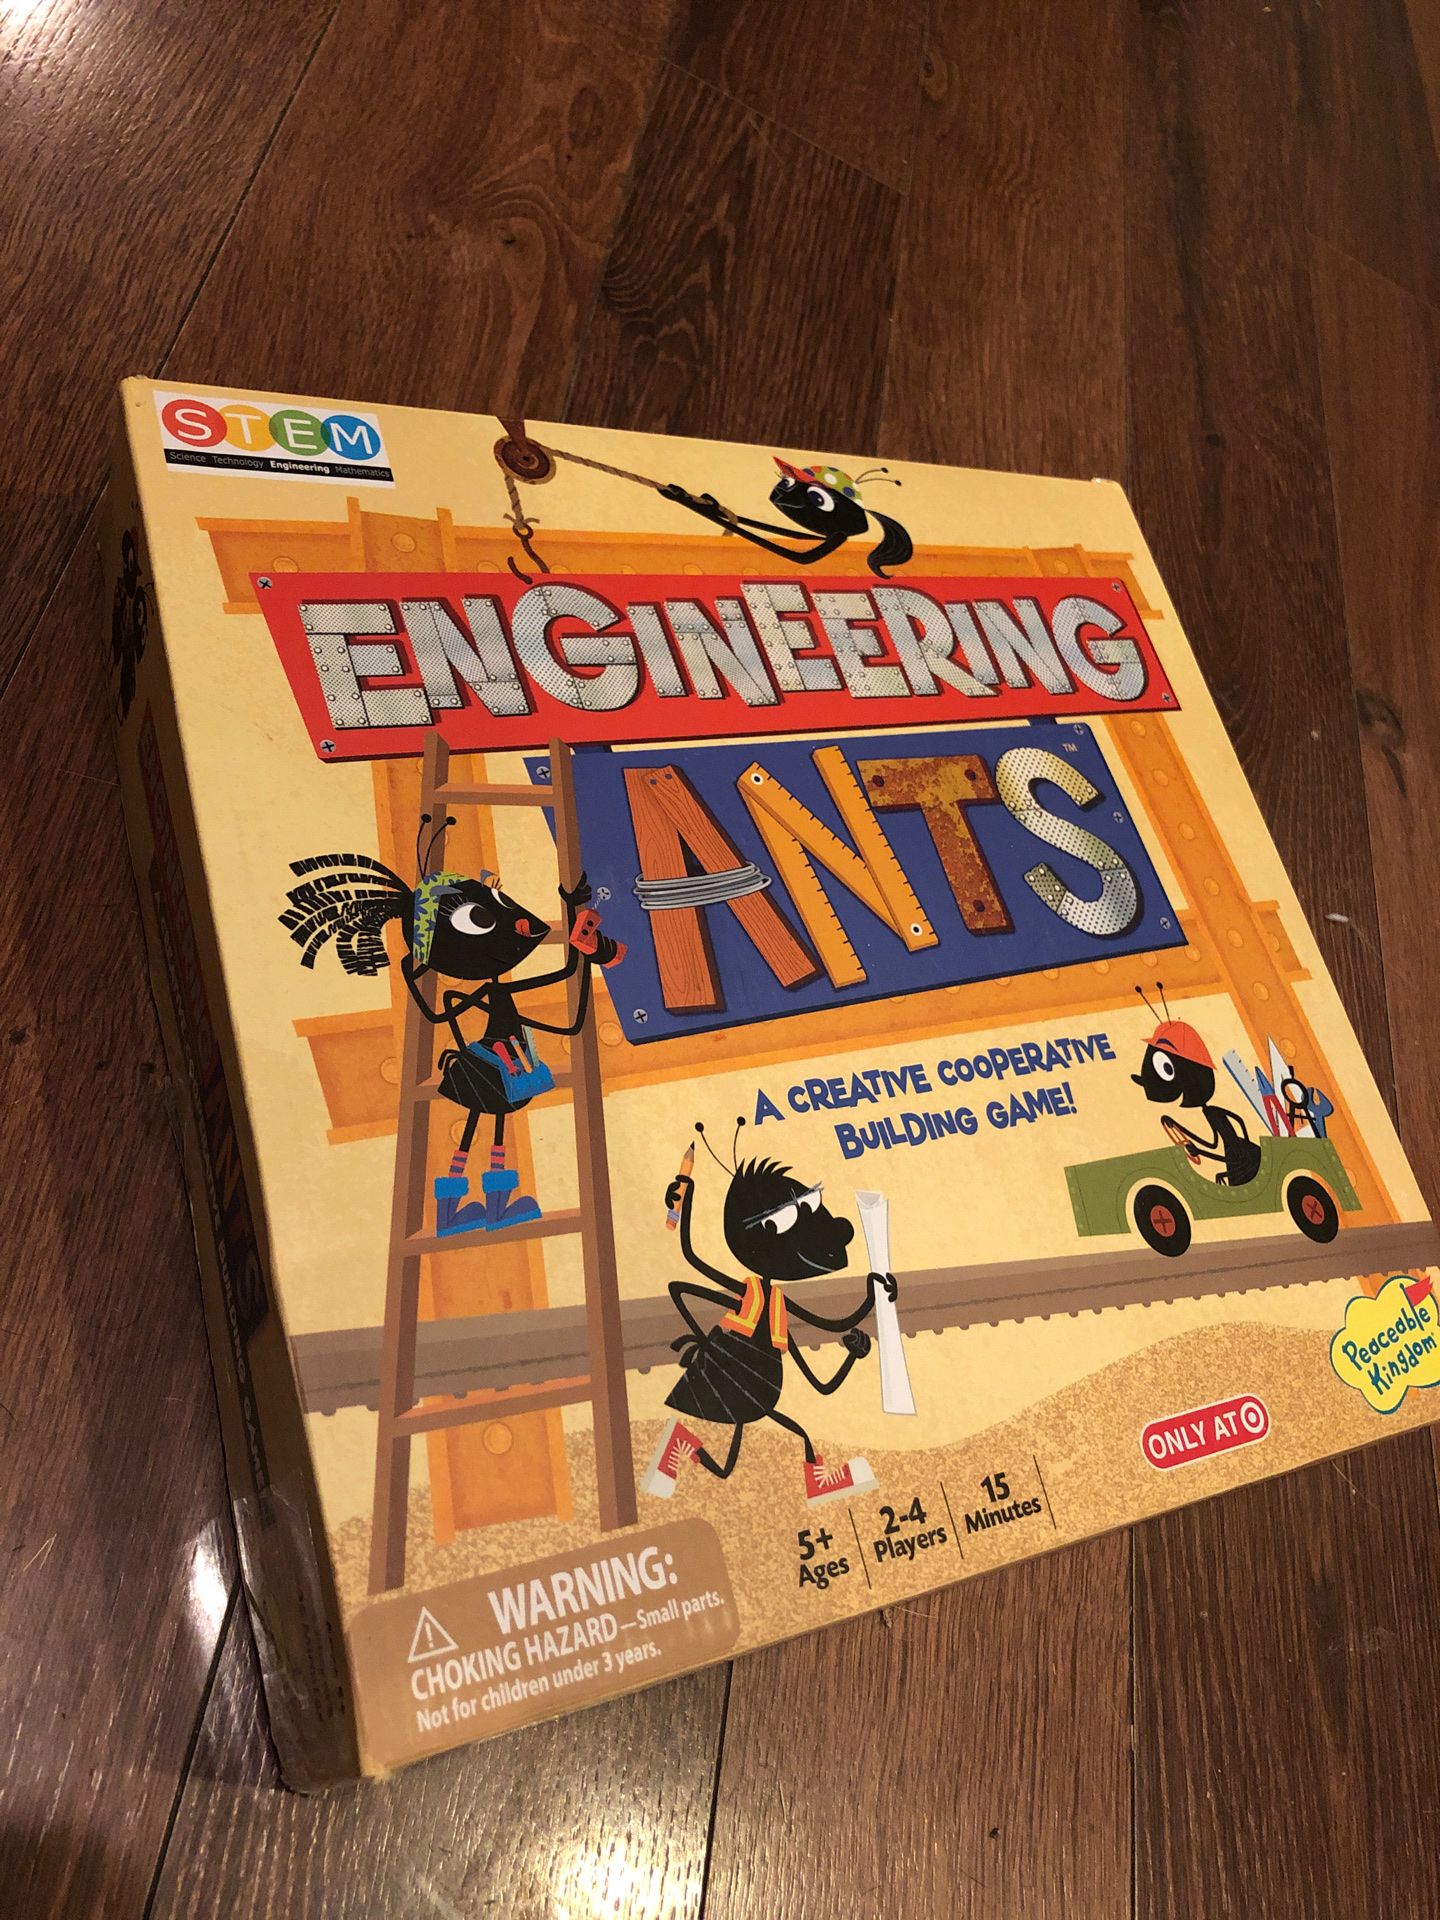 Engineering Ants - STEM, classroom, science, creative cooperative cooperative play.